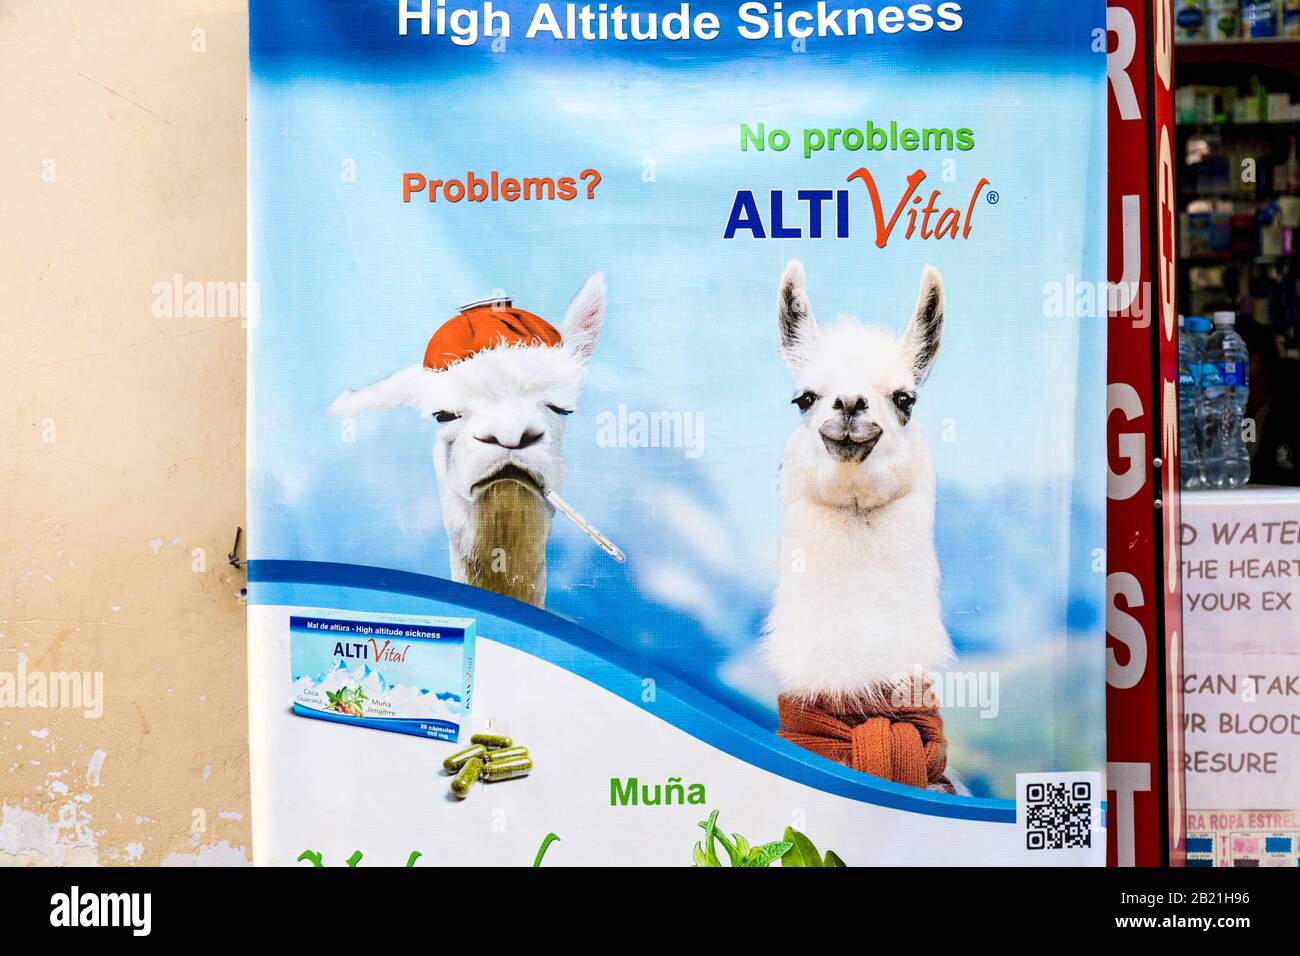 Advert for high altitude sickness medication Alti Vital with an alpaca, Cusco, Sacred Valley, Peru Stock Photo